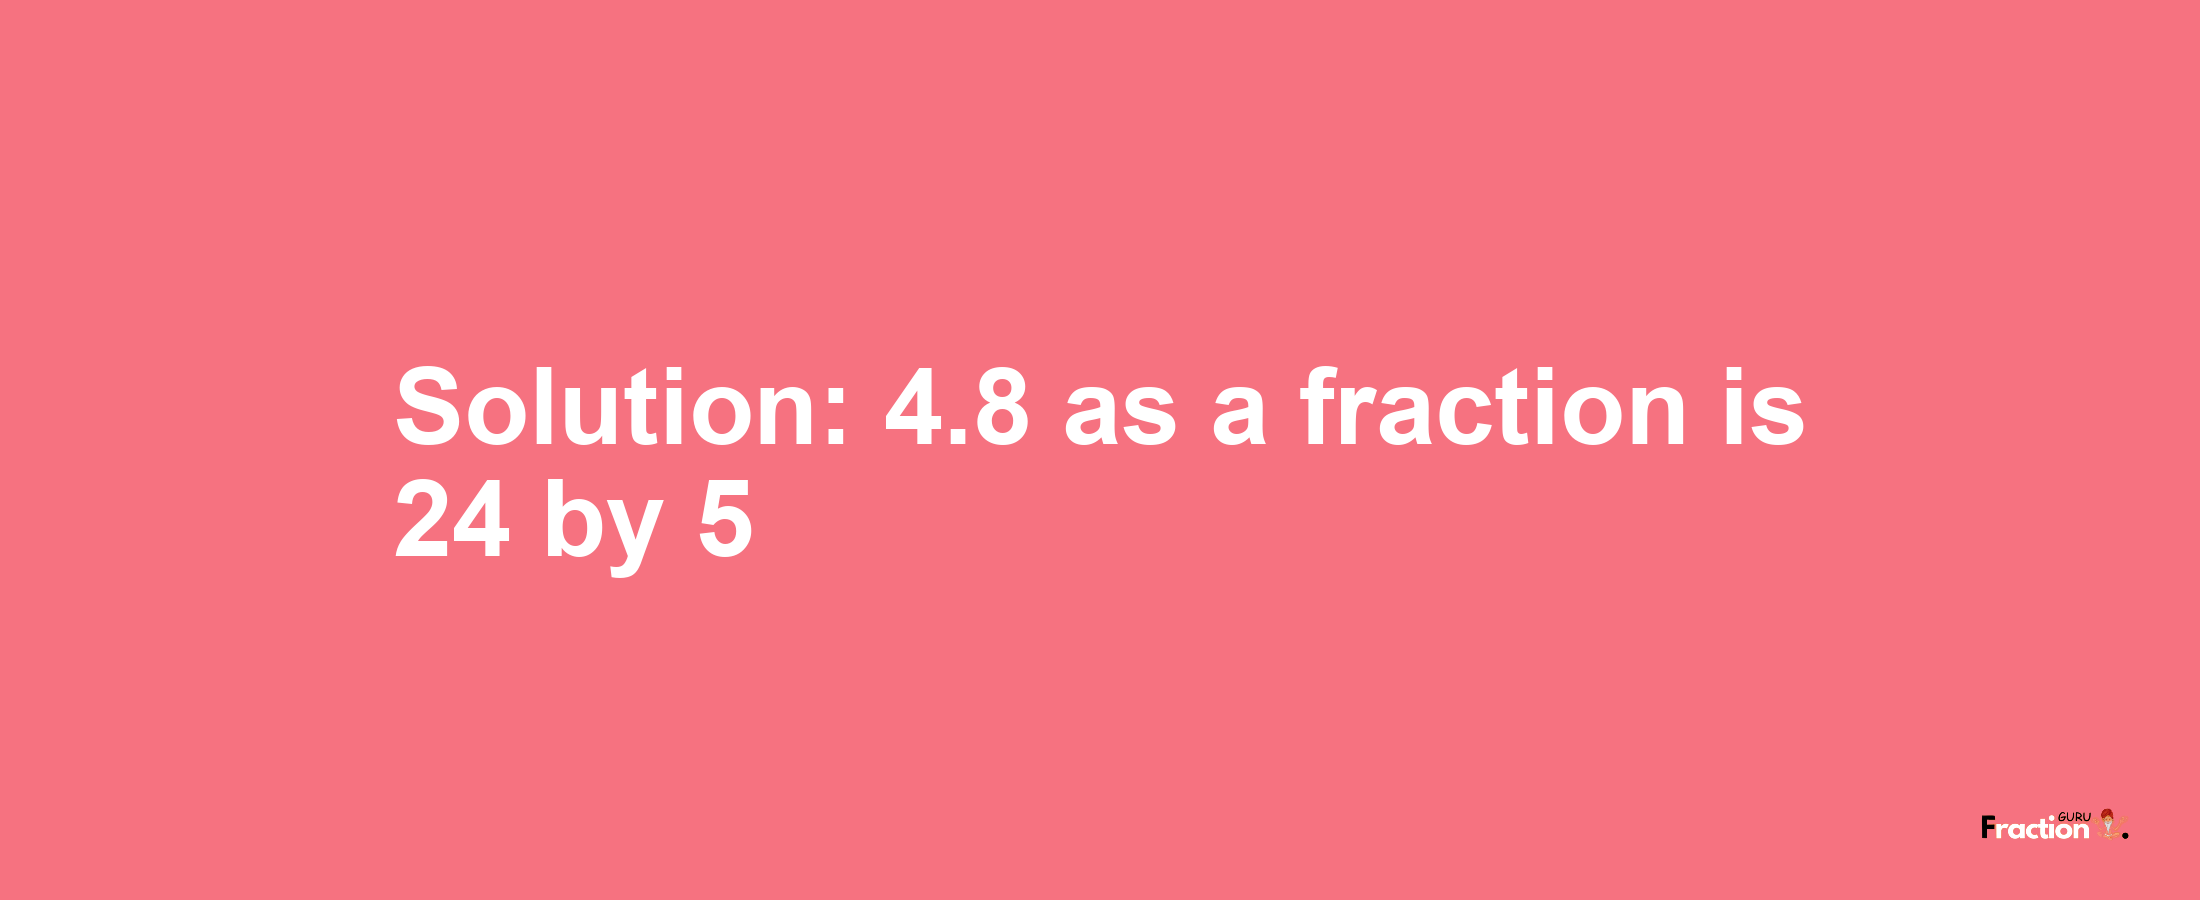 Solution:4.8 as a fraction is 24/5